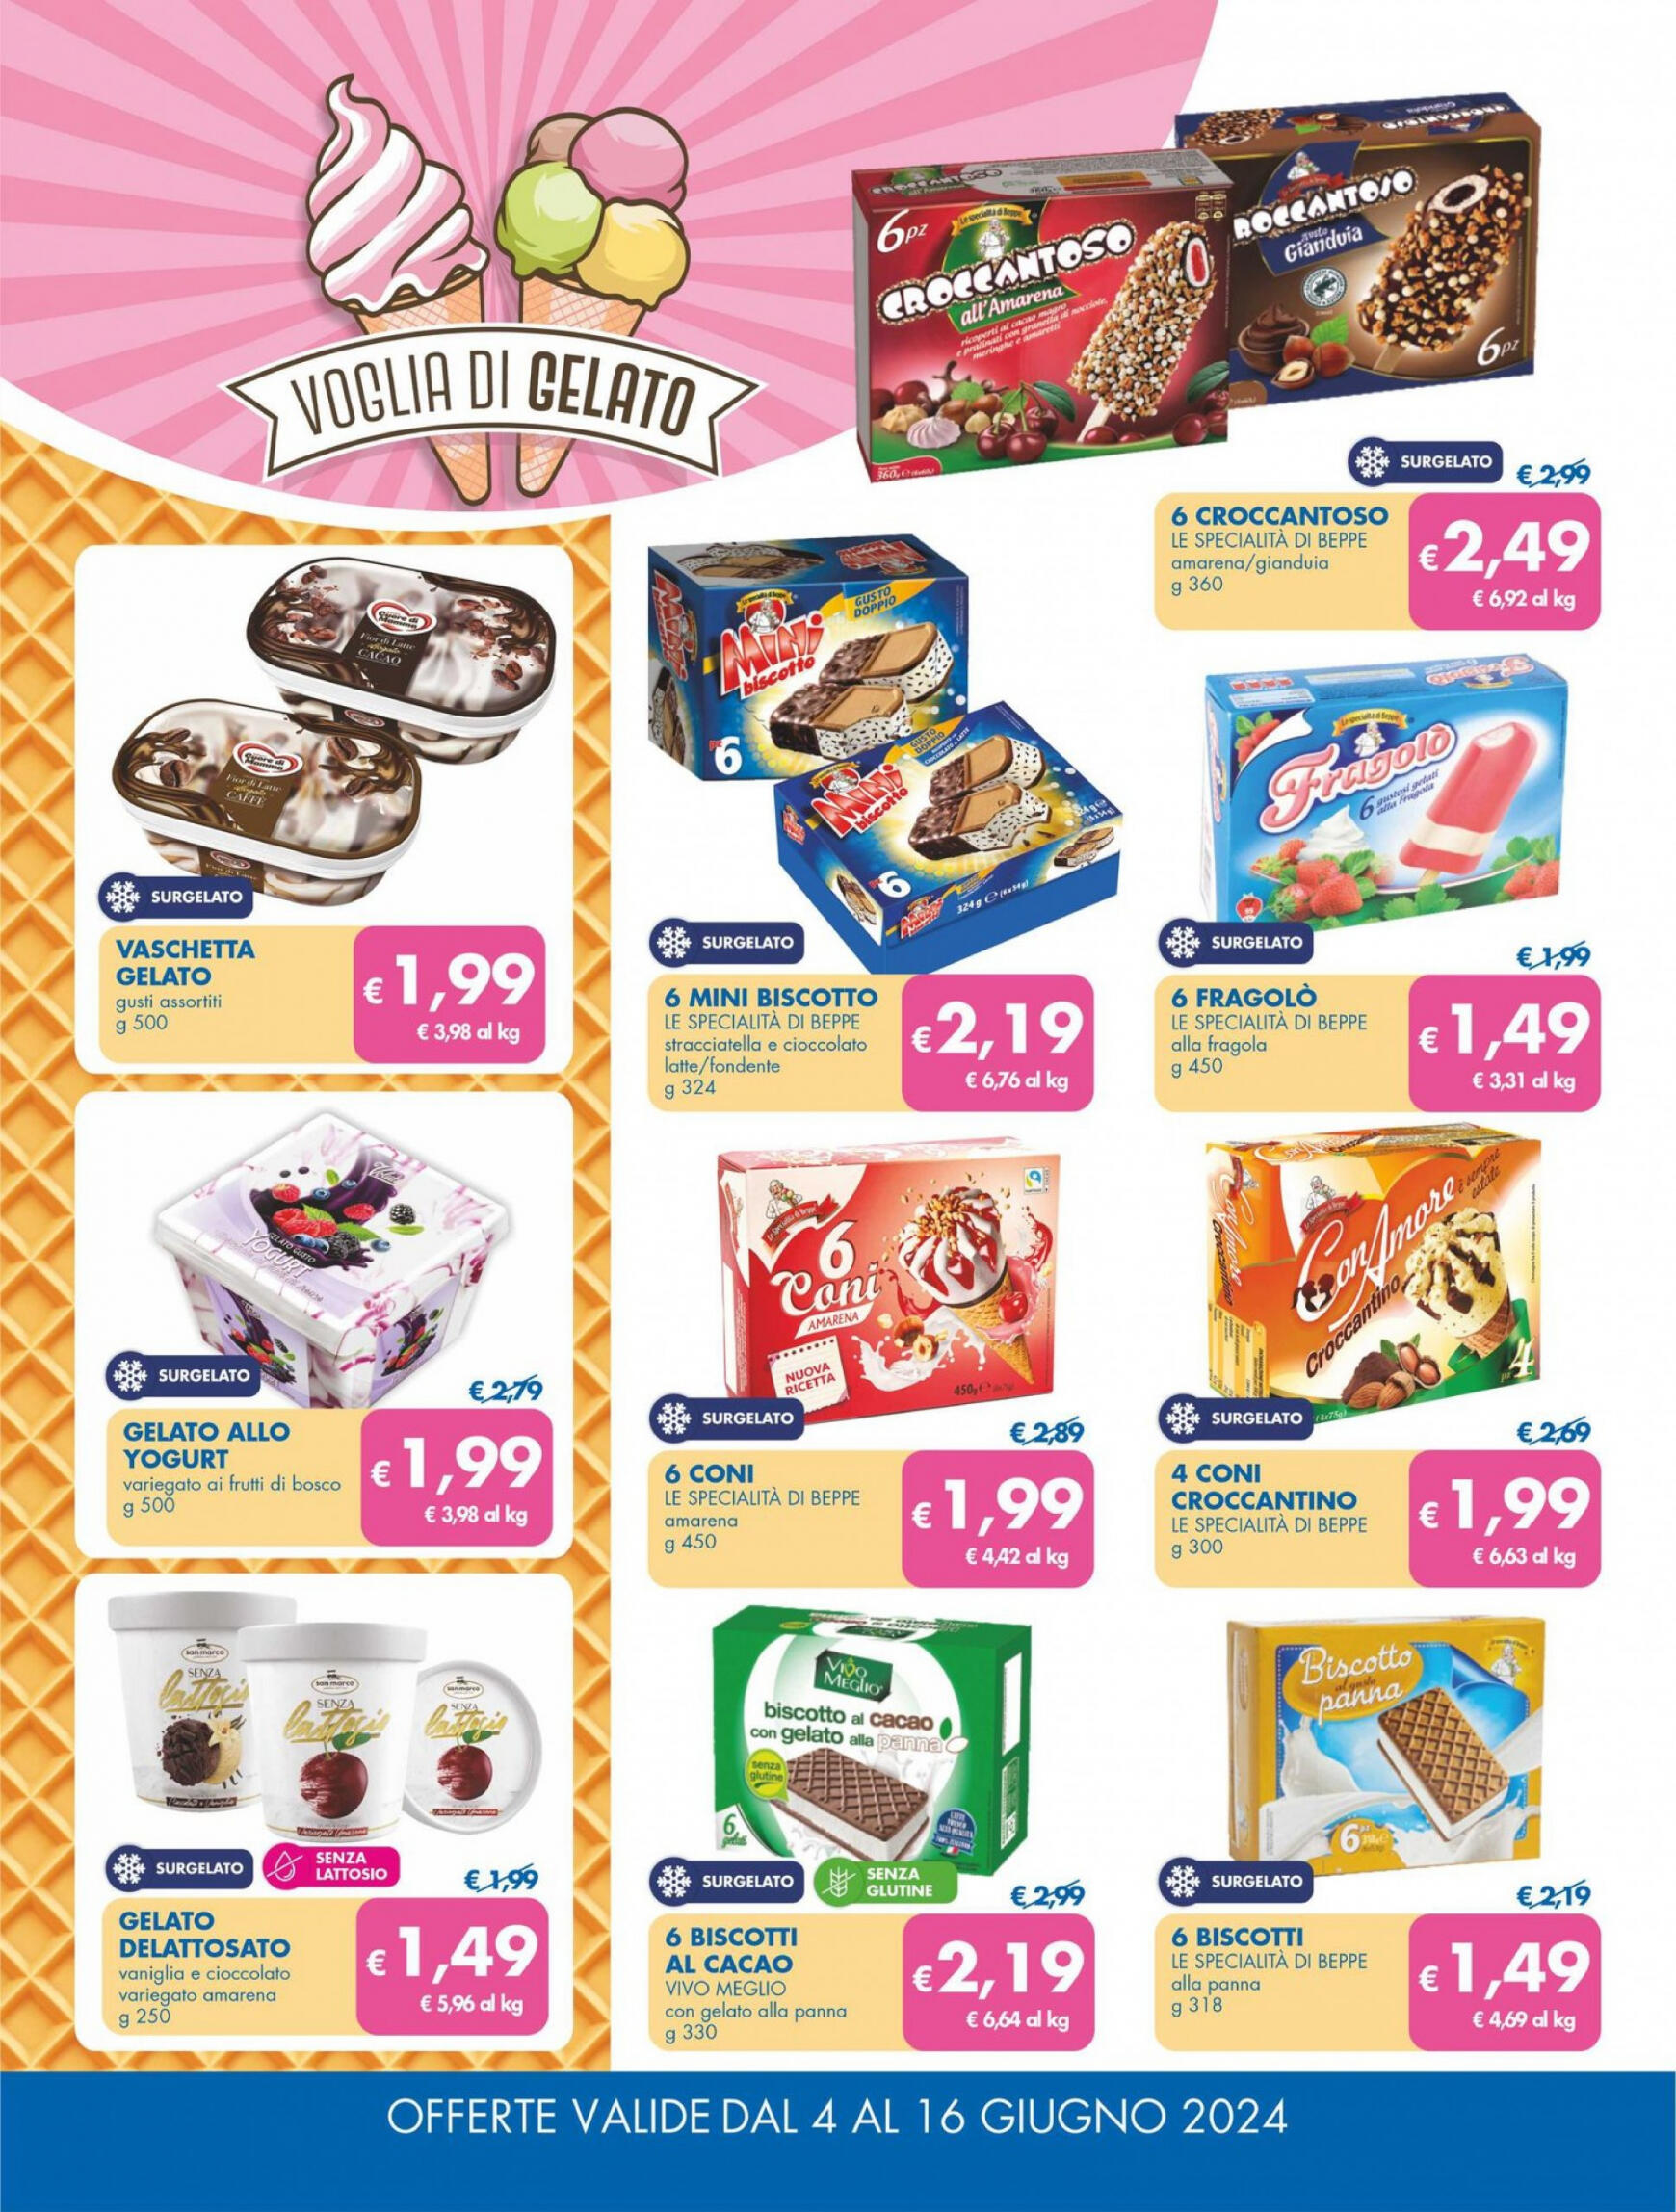 md-discount - Nuovo volantino MD 04.06. - 16.06. - page: 2